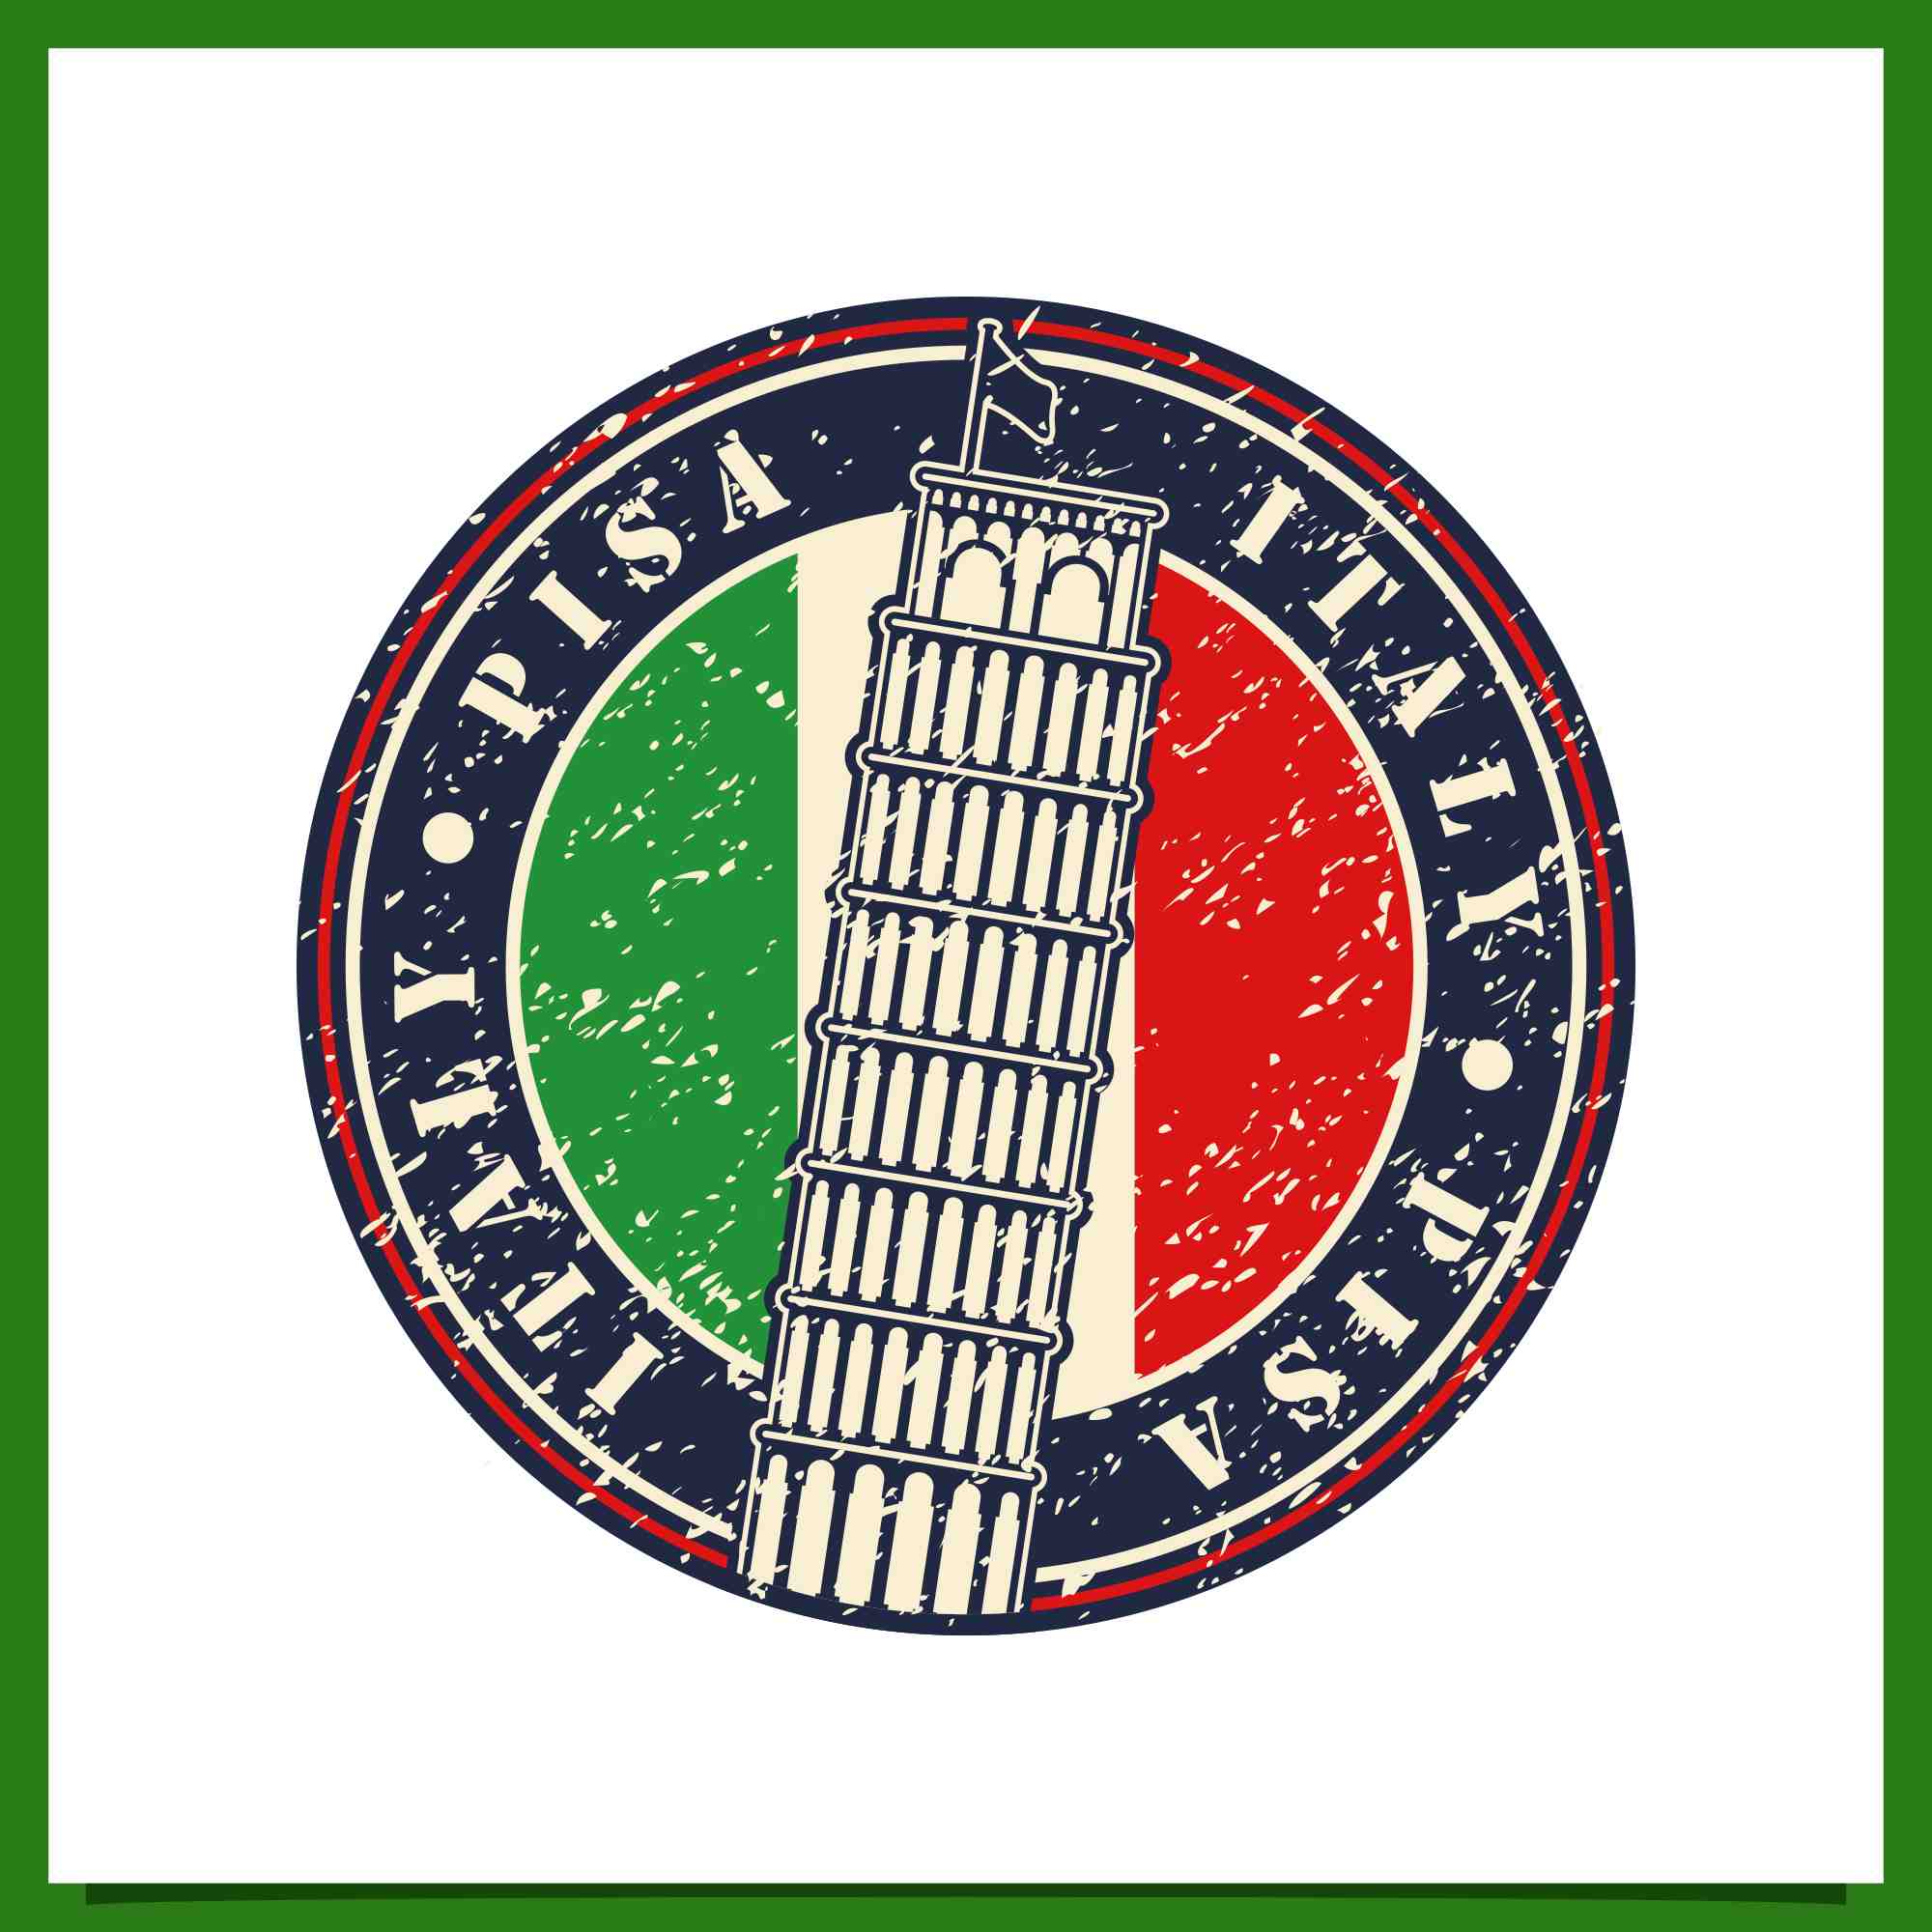 Tower of pisa italy logo design collection - $4 preview image.